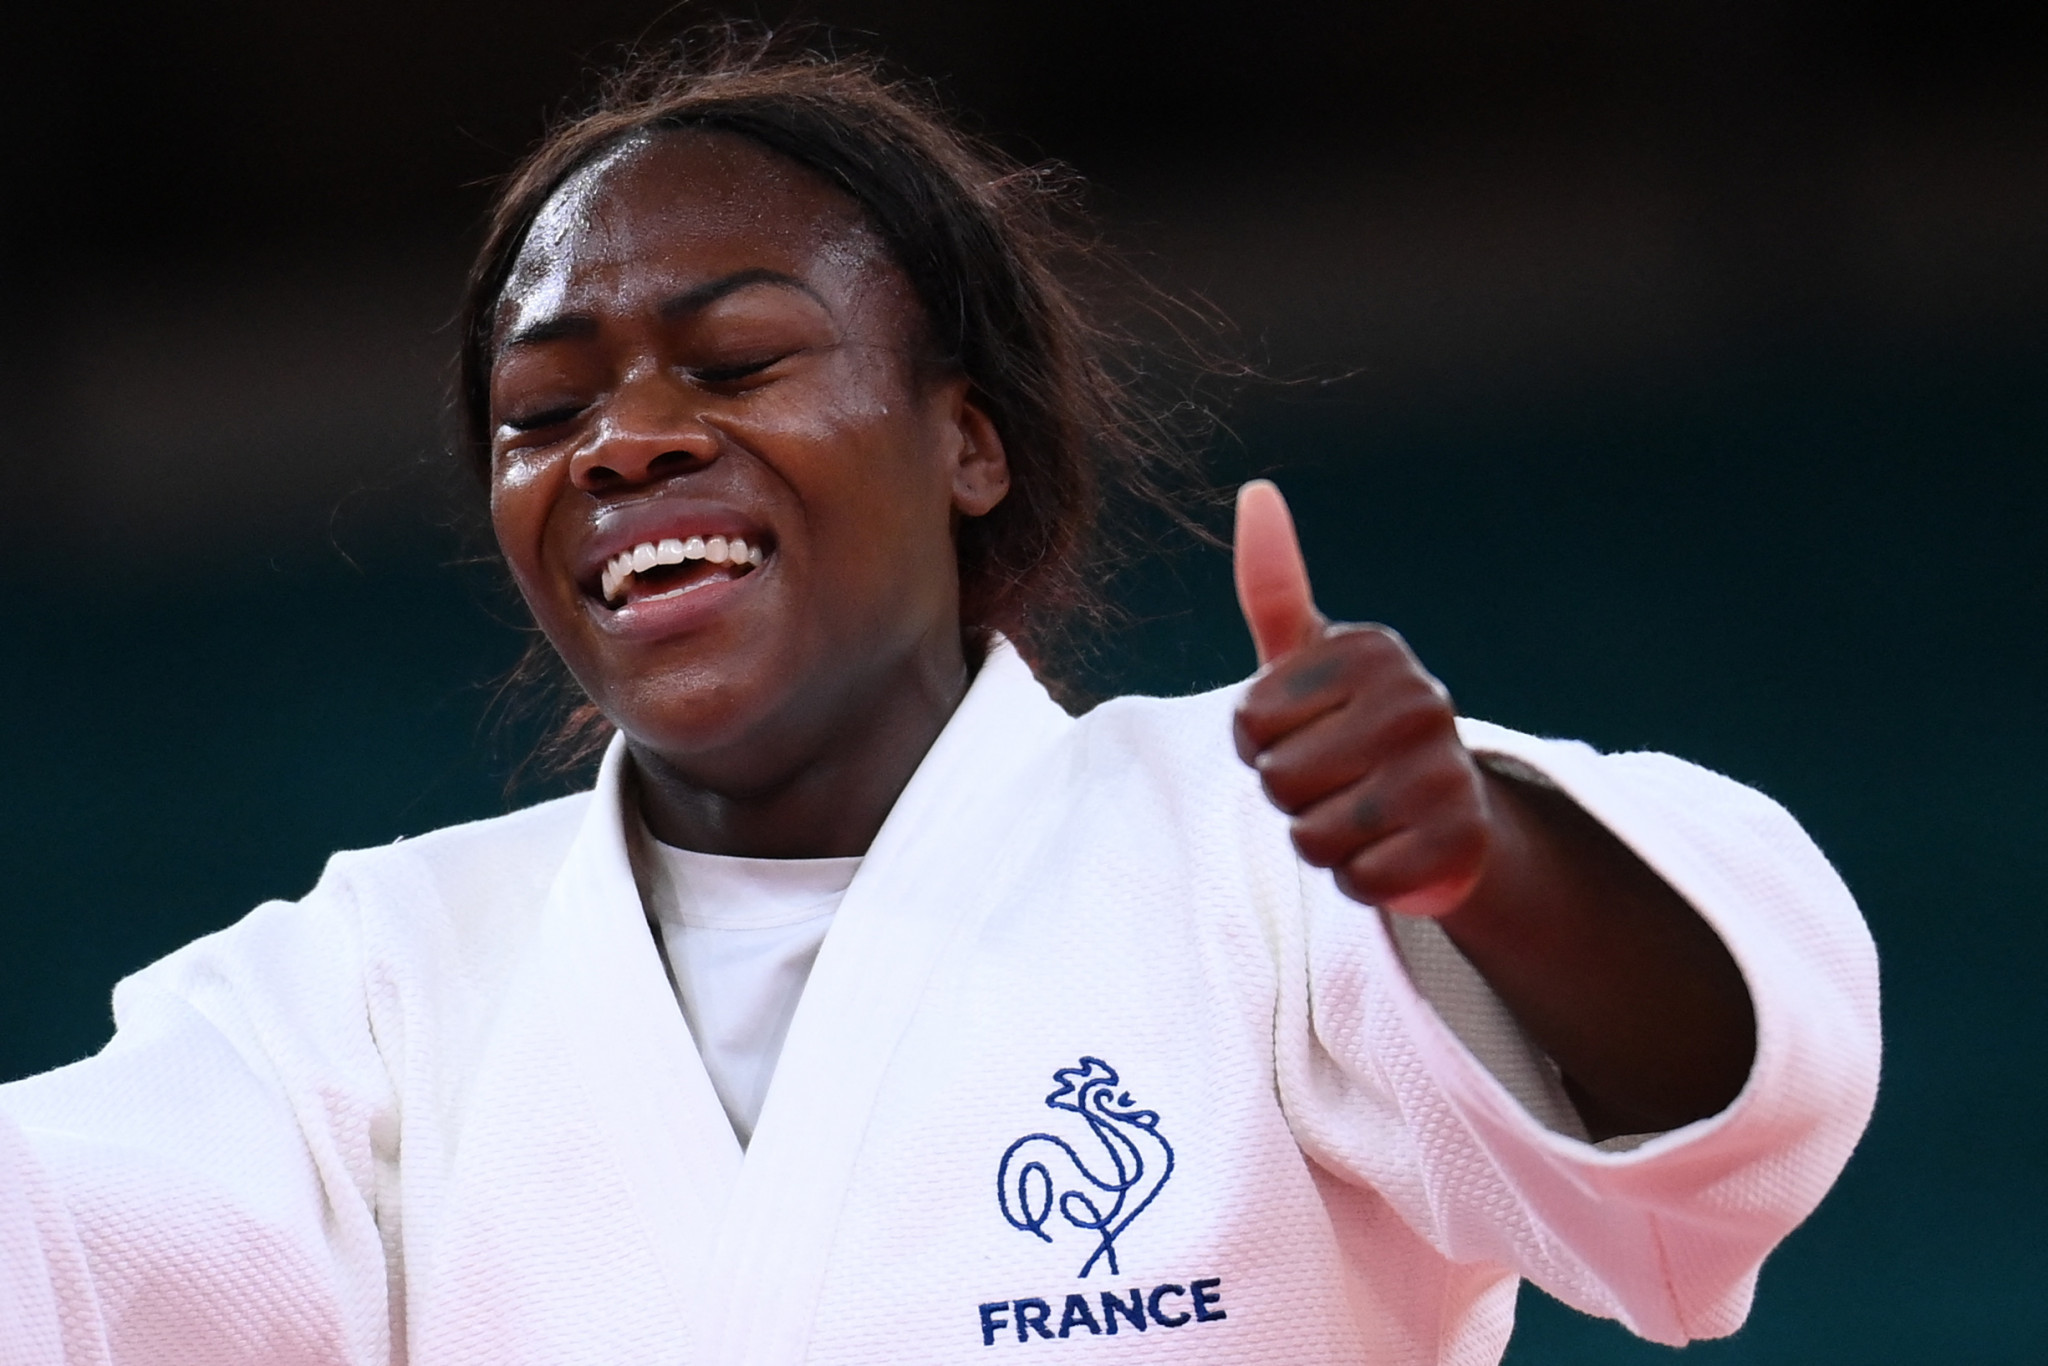 Clarisse Agbegnenou is among the nominees for the 2021 International Judo Federation Awards ©Getty Images